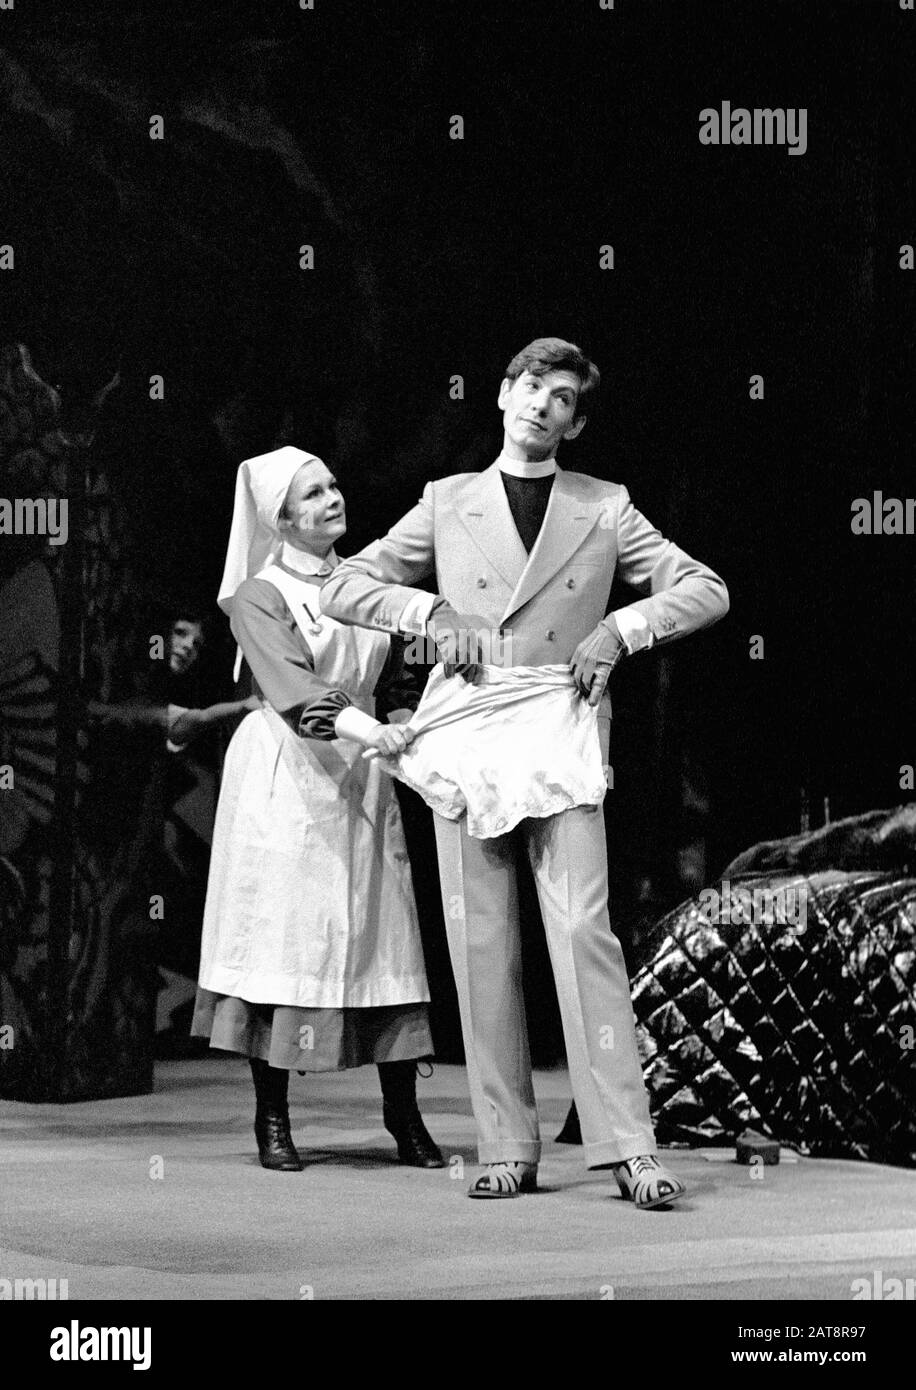 Judi Dench (Sweetie Simpkins) and Ian McKellen (Aubrey Bagot) in TOO TRUE TO BE GOOD by George Bernard Shaw directed by Clifford Williams for Royal Shakespeare Company (RSC) at the Aldwych Theatre, London in 1975.  Sir Ian Murray McKellen, born 1939, Burnley, England. English stage and film actor. Co-founder of Stonewall, gay rights activist, knighted in 1990, made a Companion of Honour 2007. Dame Judith Olivia Dench CH DBE FRSA, born 1934. Married to the actor Michael Williams from 1971 until his death in 2001. They had one daughter, the actress Finty Williams, born in 1972. Stock Photo